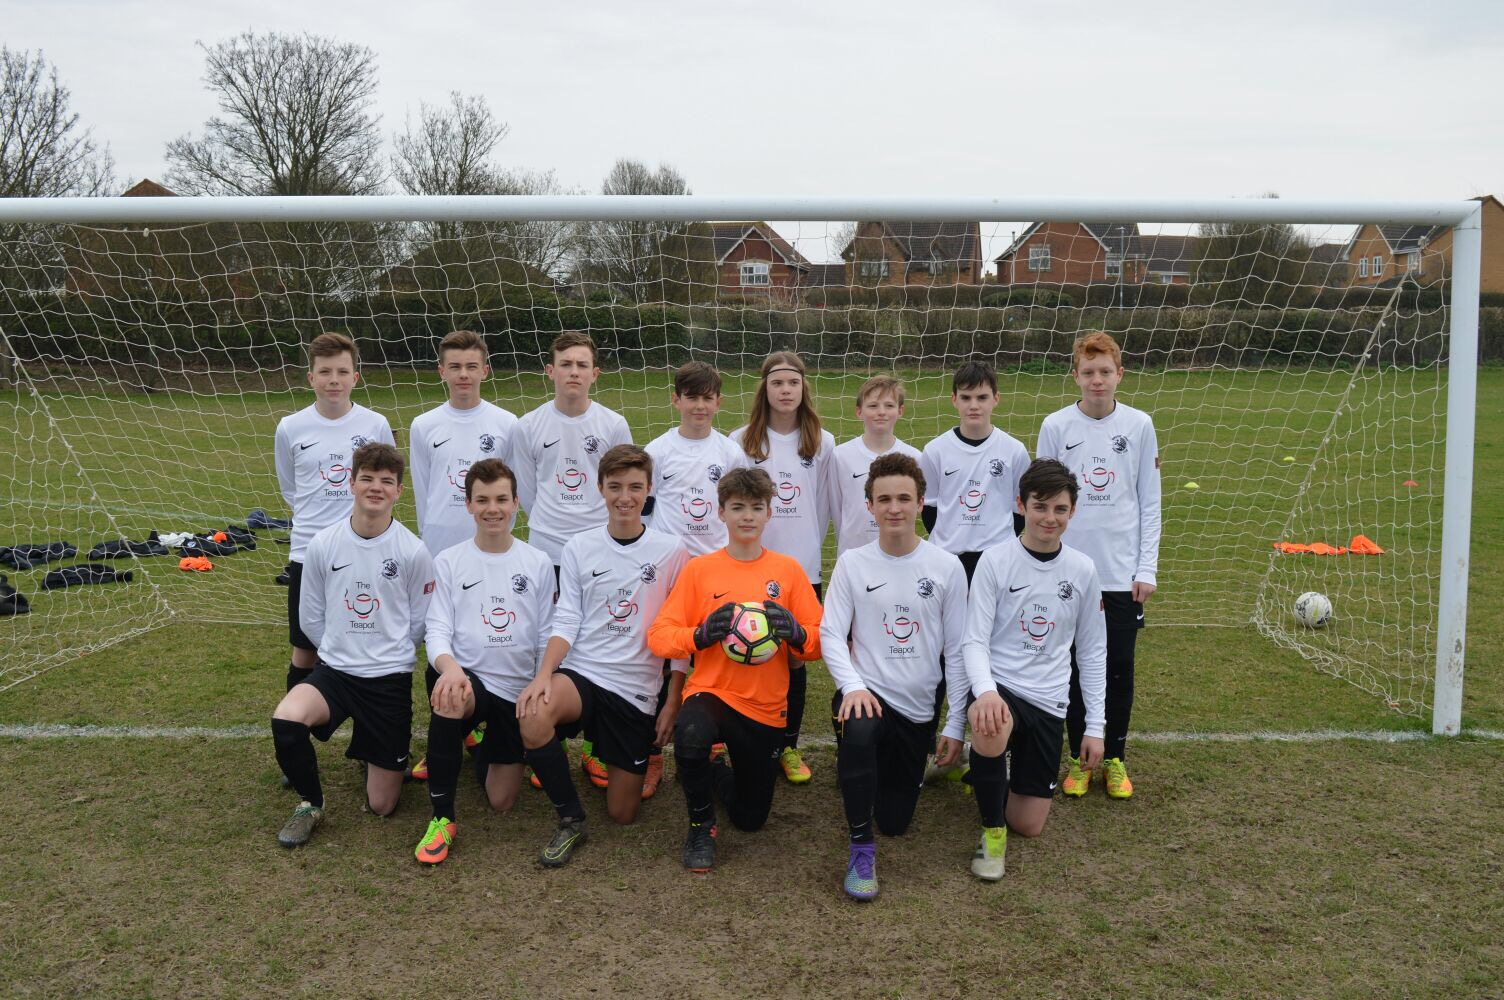 The Under 15's Eagles